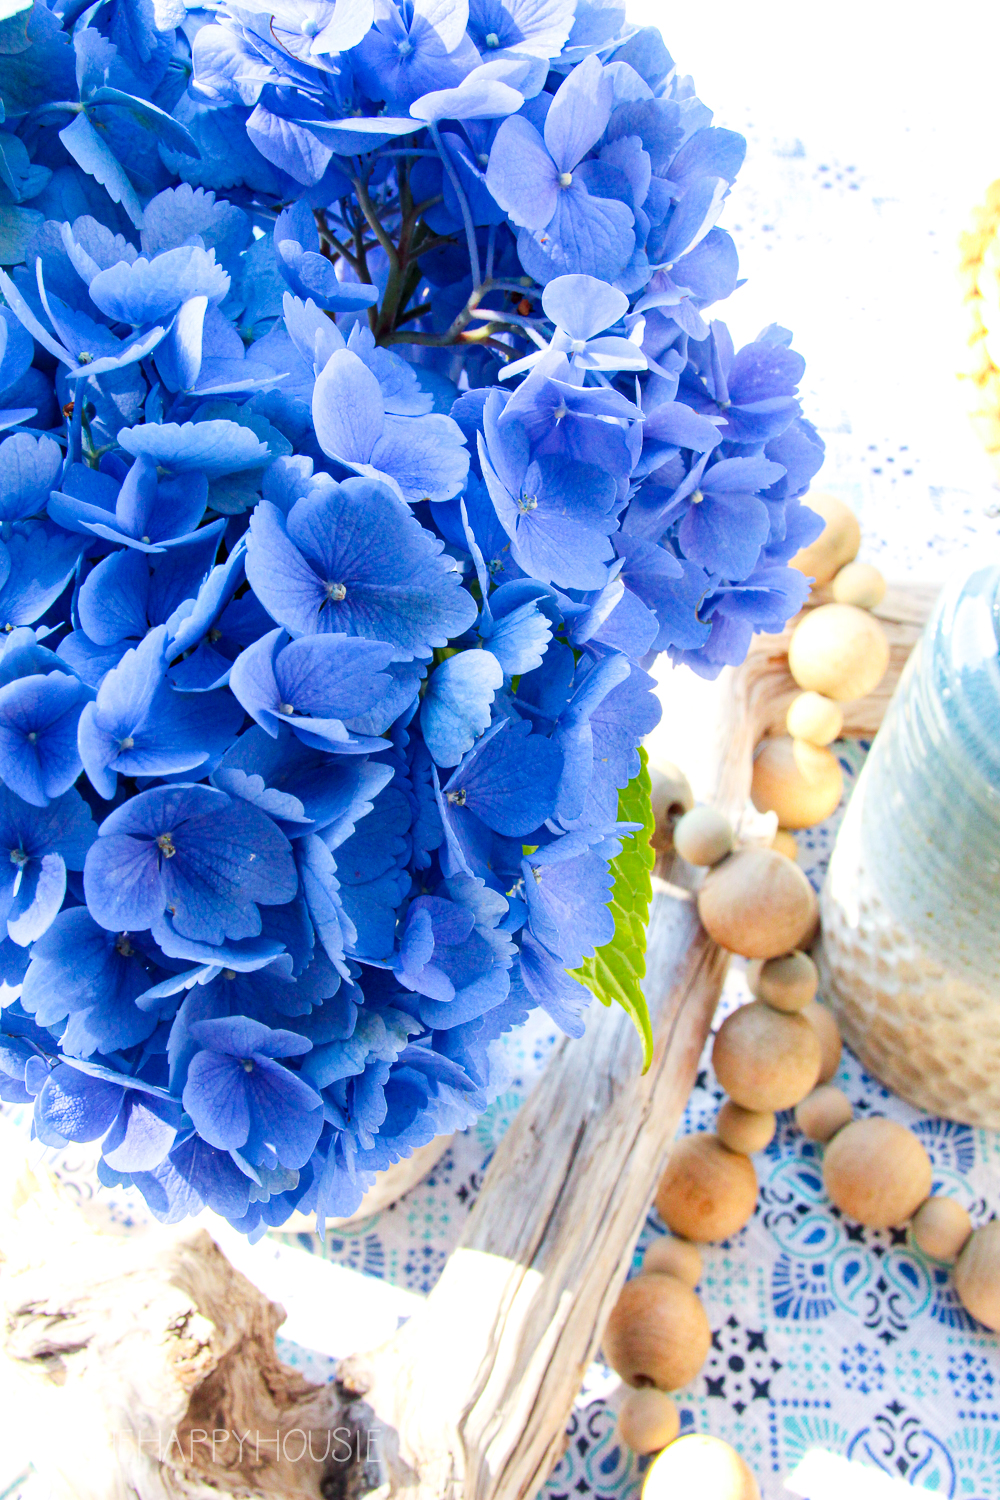 Blue hydrangeas are in a vase next to the driftwood.